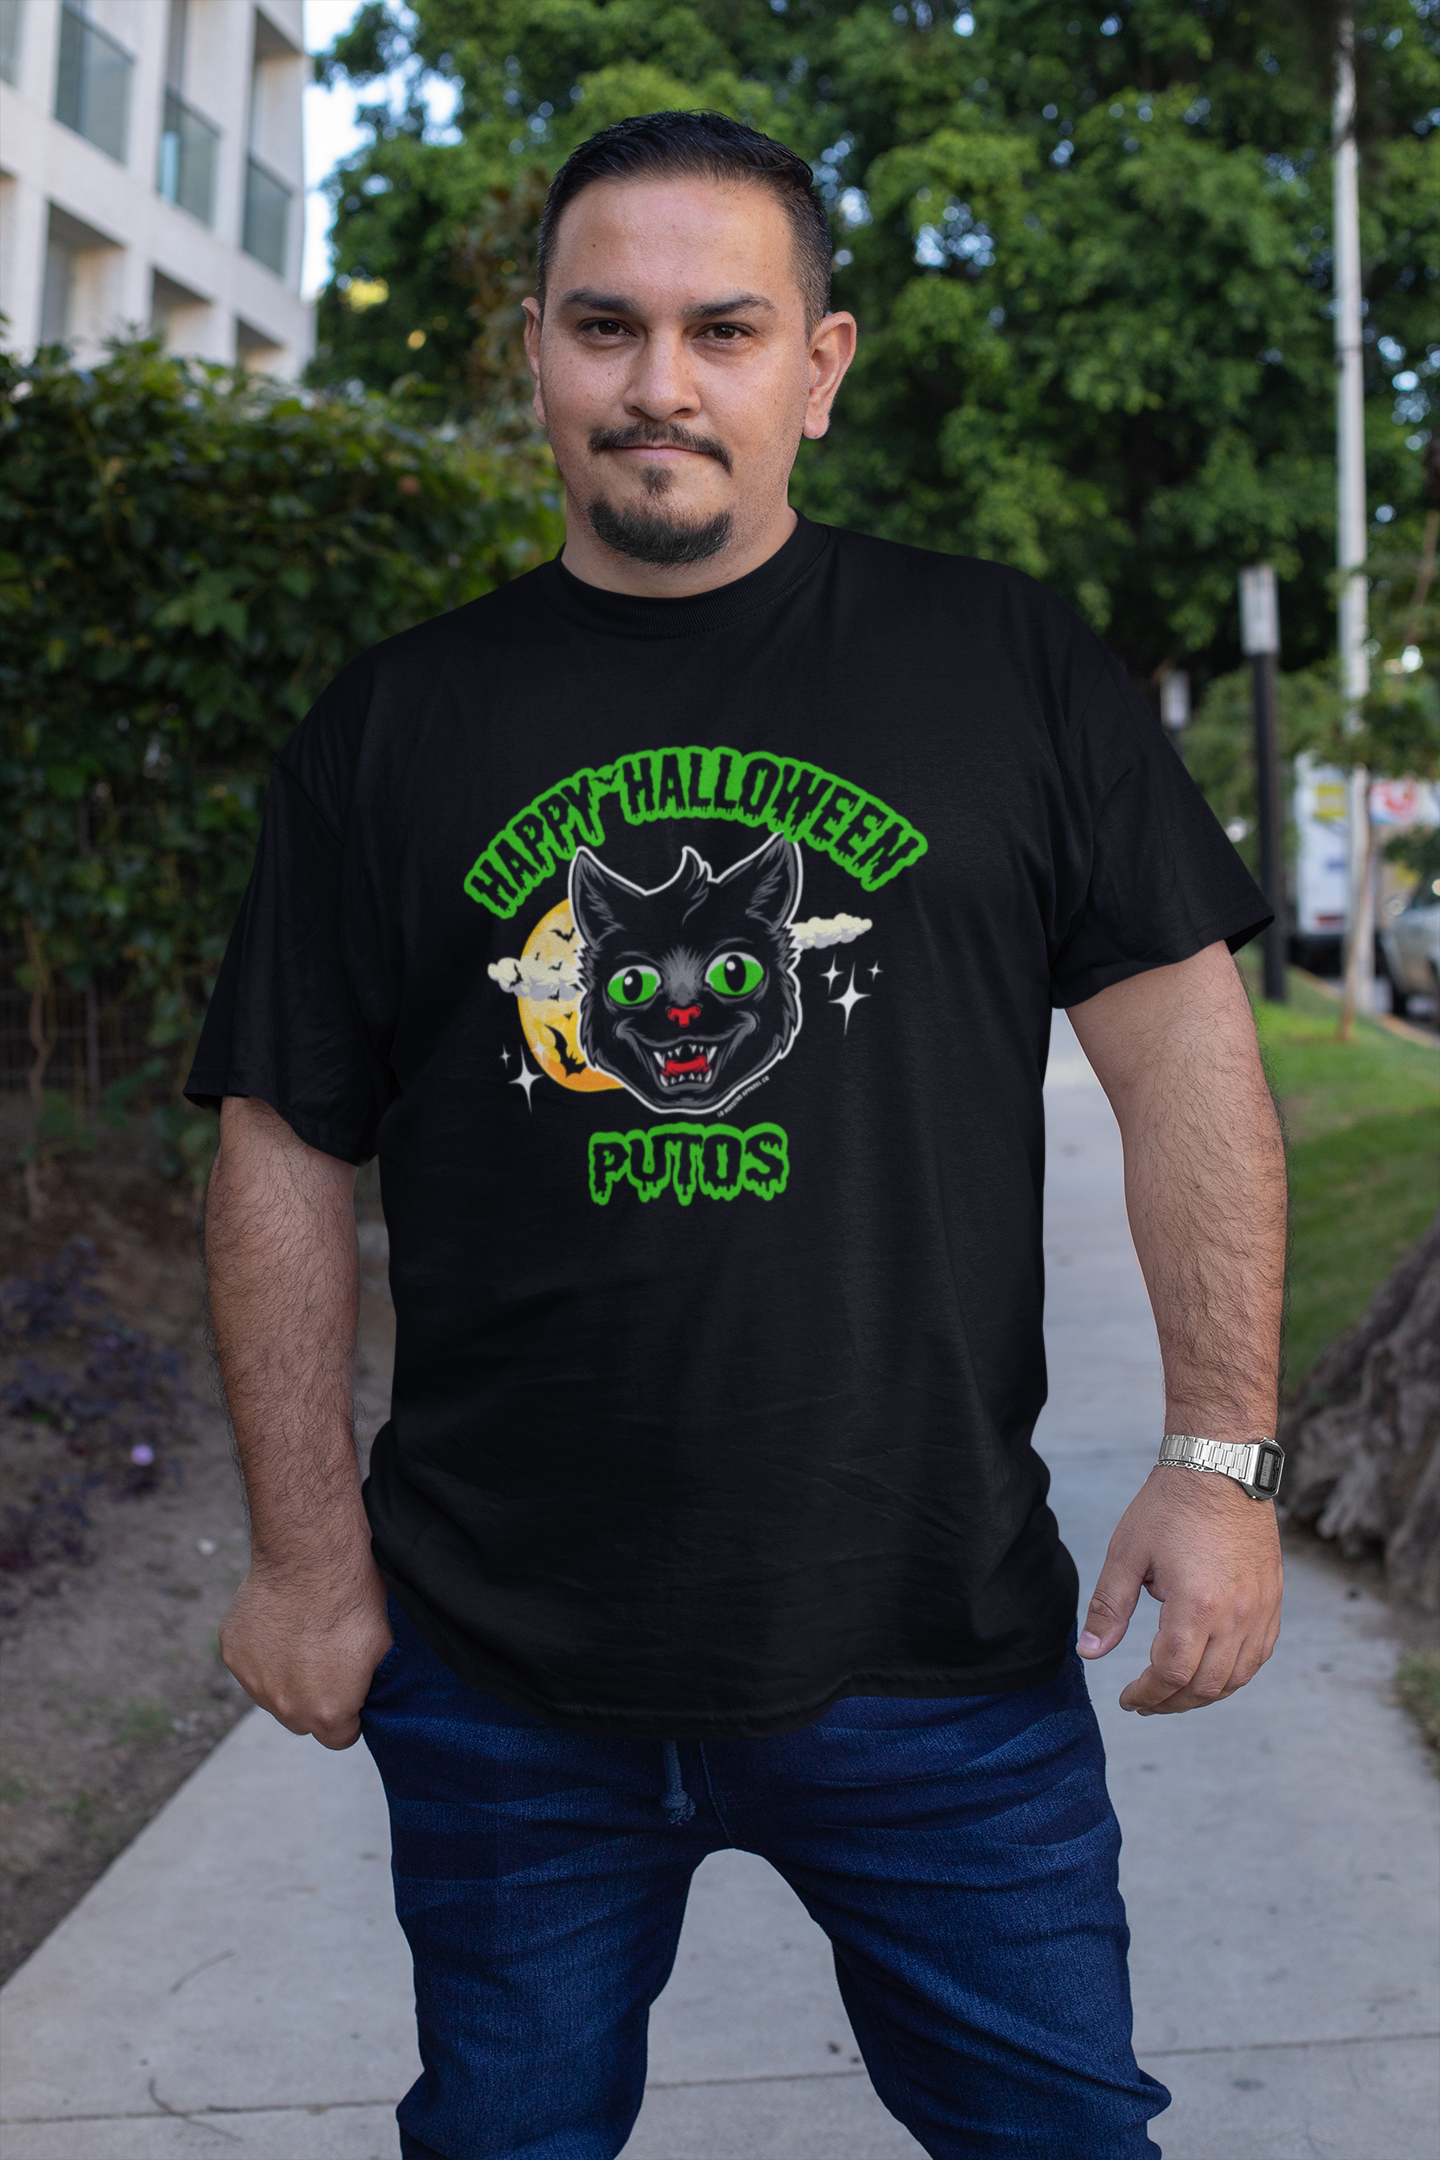 Man wearing Happy Halloween Putos Men's T-Shirt with black cat graphic while standing outside – Funny Halloween T-Shirt, Sarcastic Halloween Shirt, Men's Halloween Apparel.